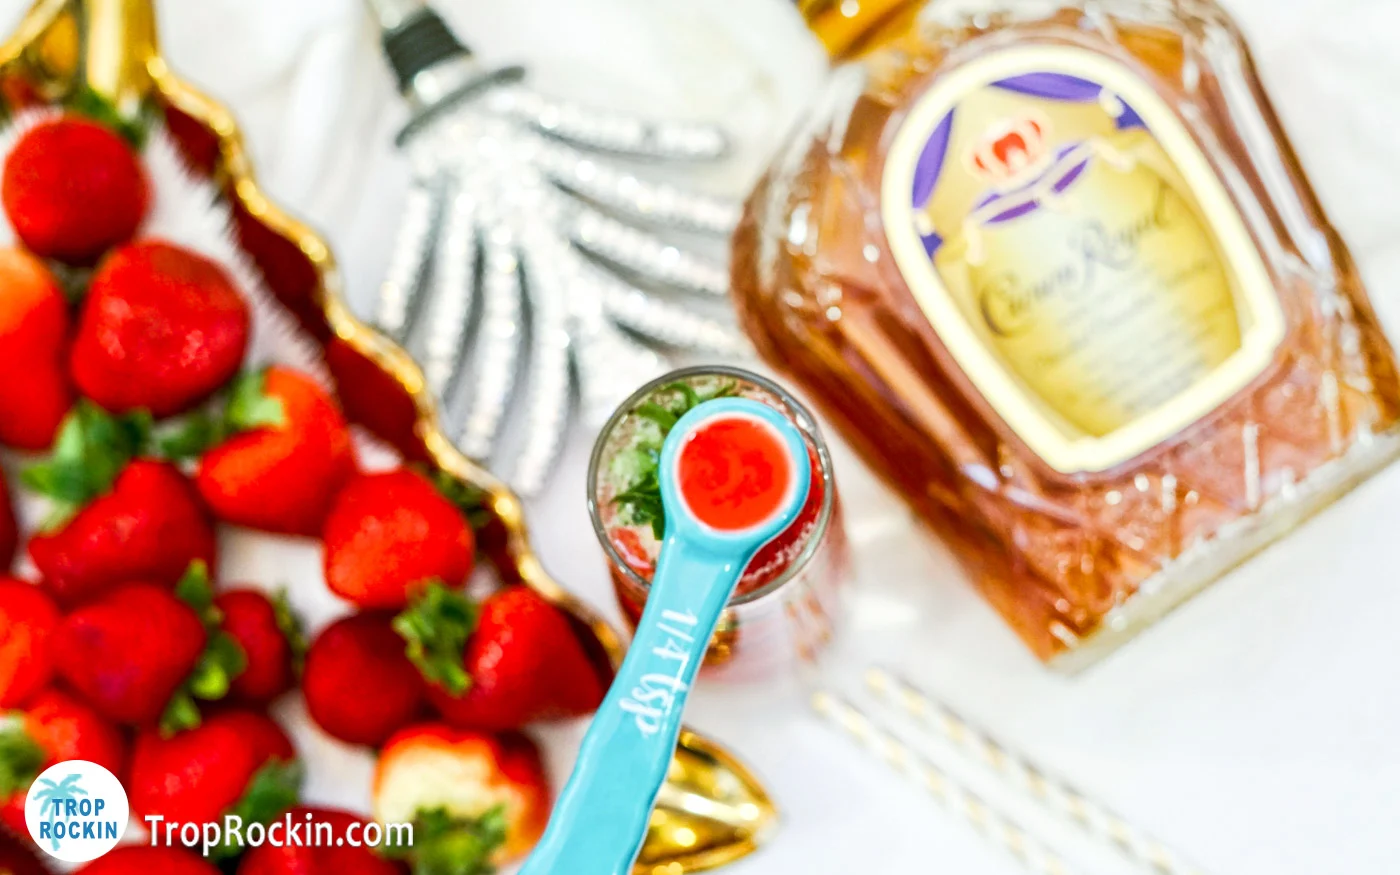 Adding strawberry syrup into the crown royal drink.